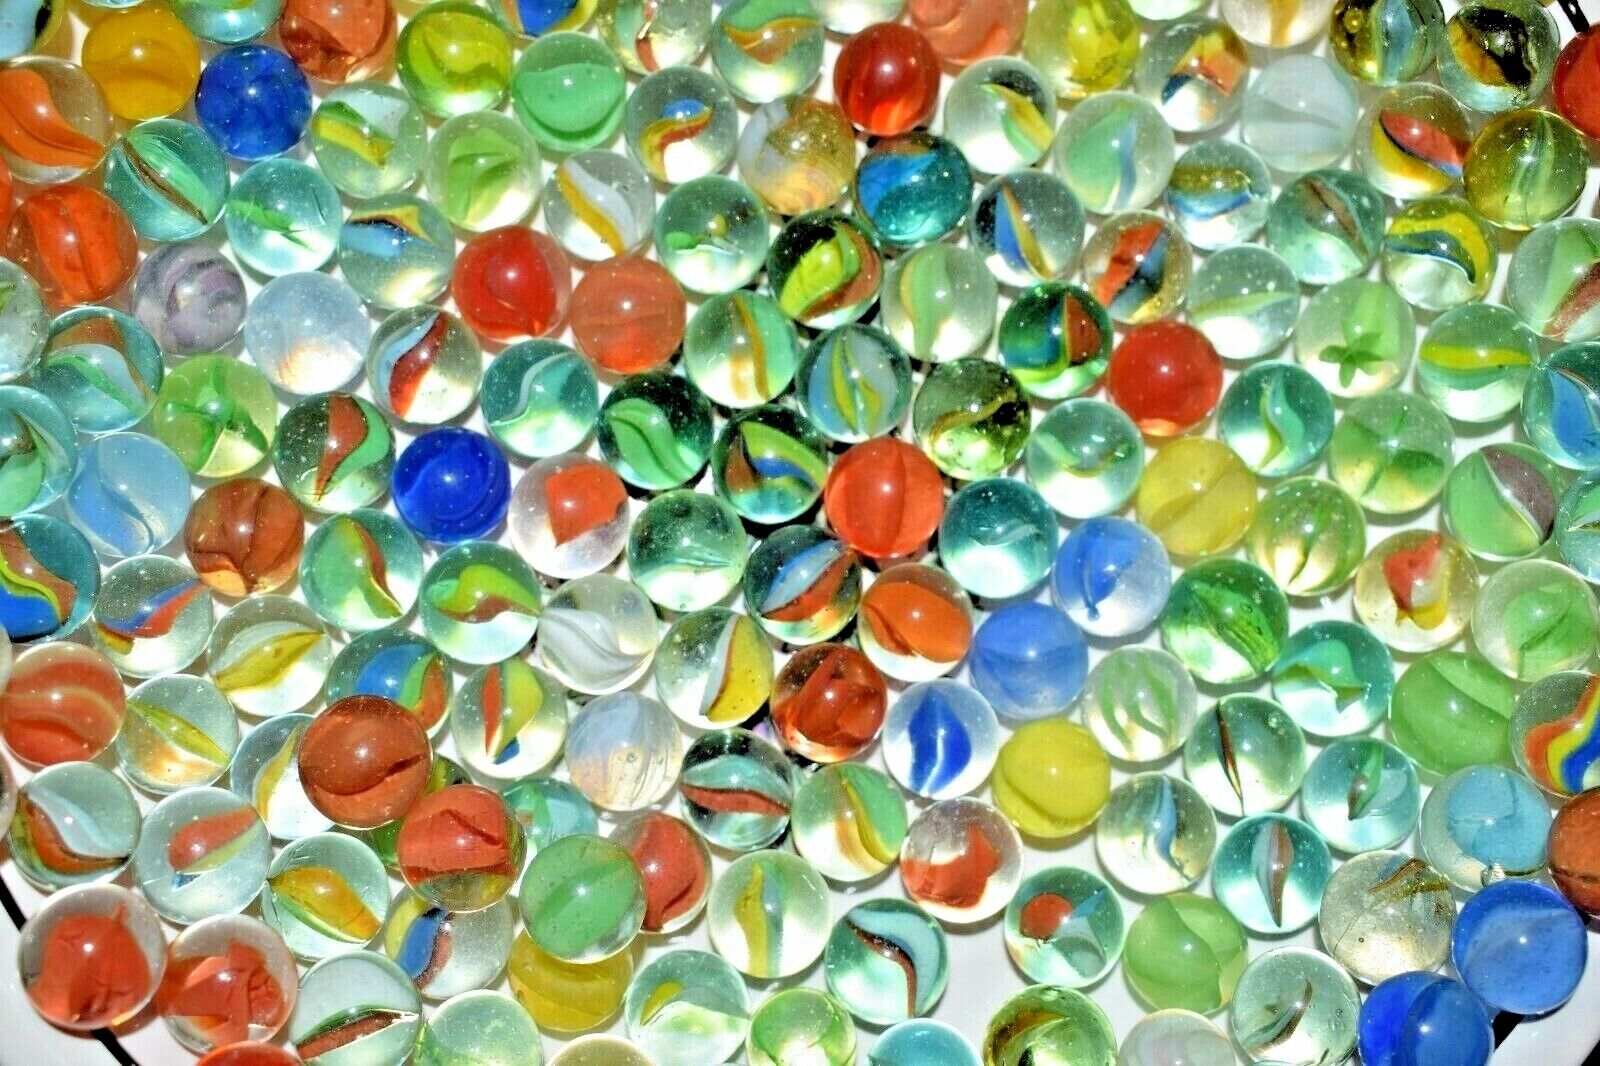 Lot of 50 Vintage Bright Colors Mixed Cat's Eye Marbles Size .625" / 5/8" Mint! unmarked mixes brands